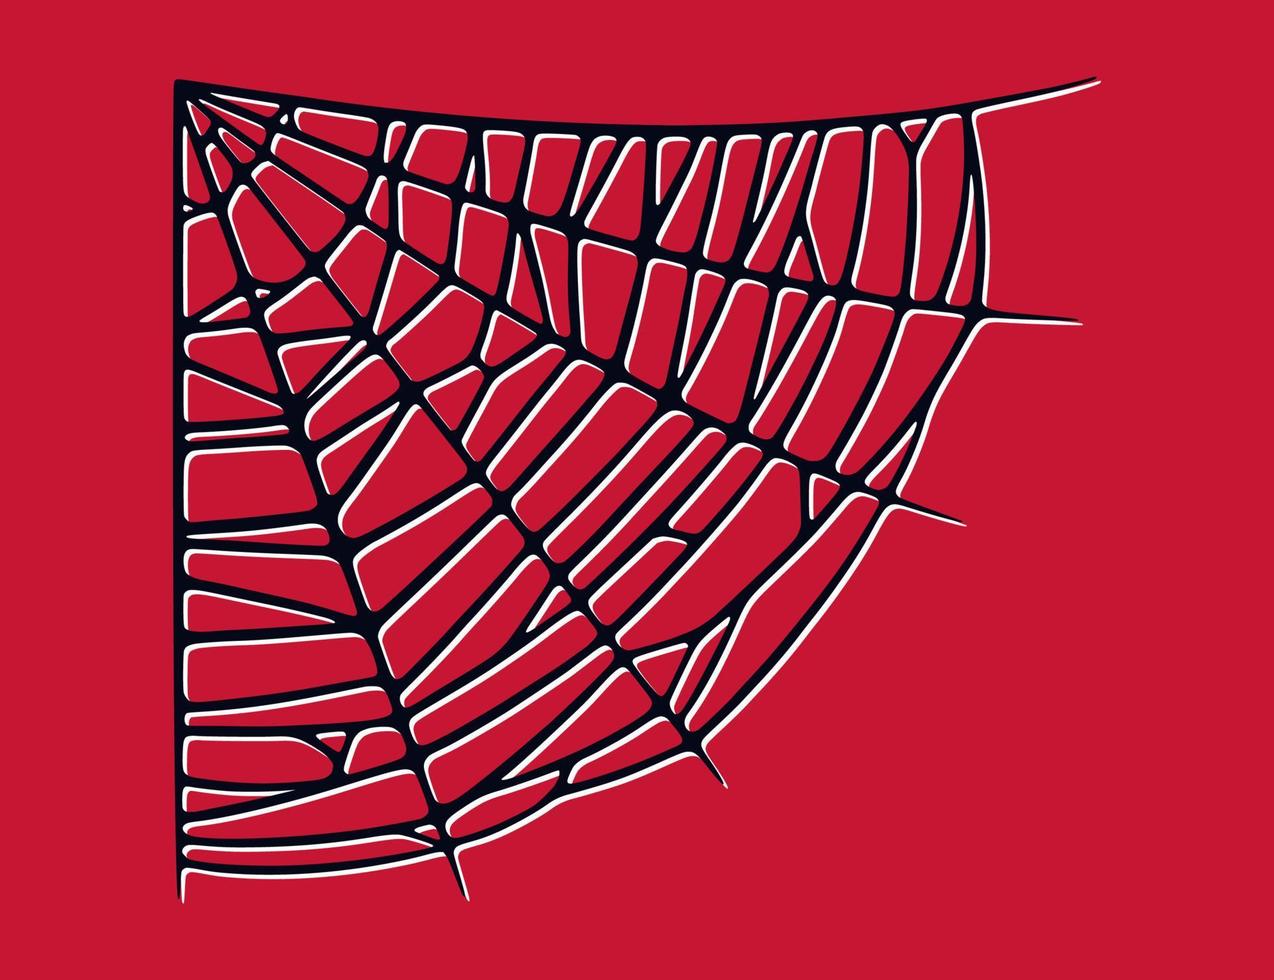 Spider web isolated on red background. Spooky Halloween cobwebs with red threads. Vector illustration